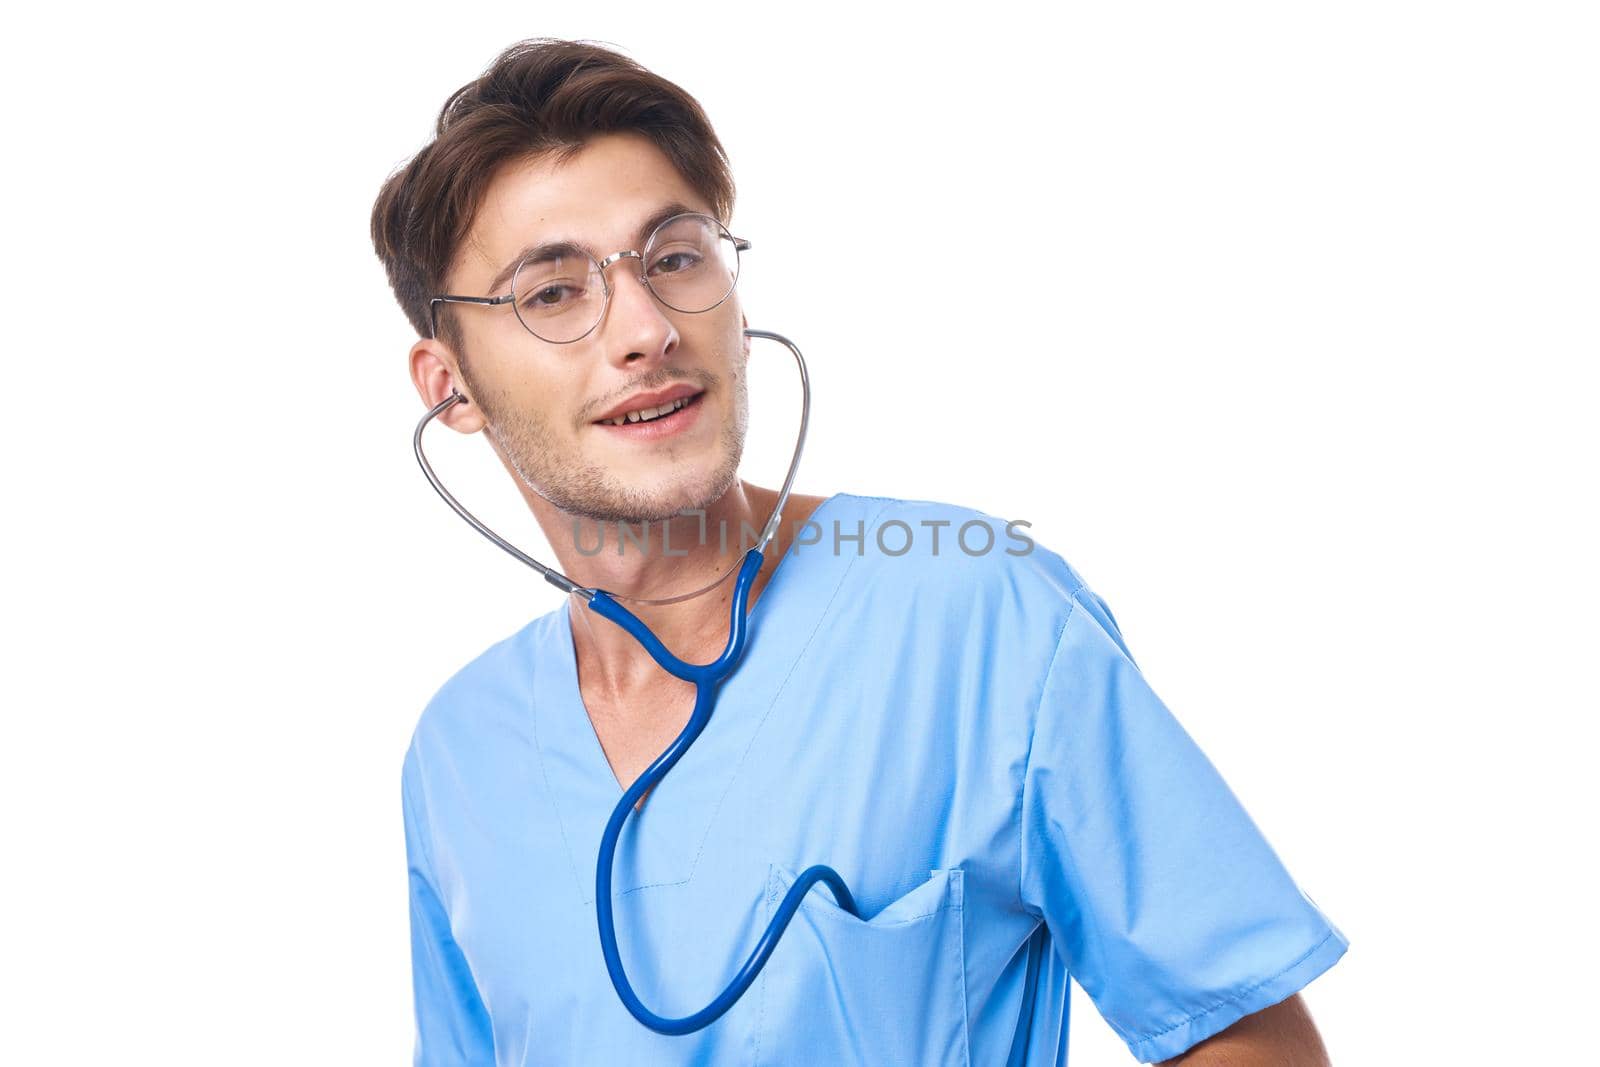 male doctor patient treatment hospital medicine light background. High quality photo